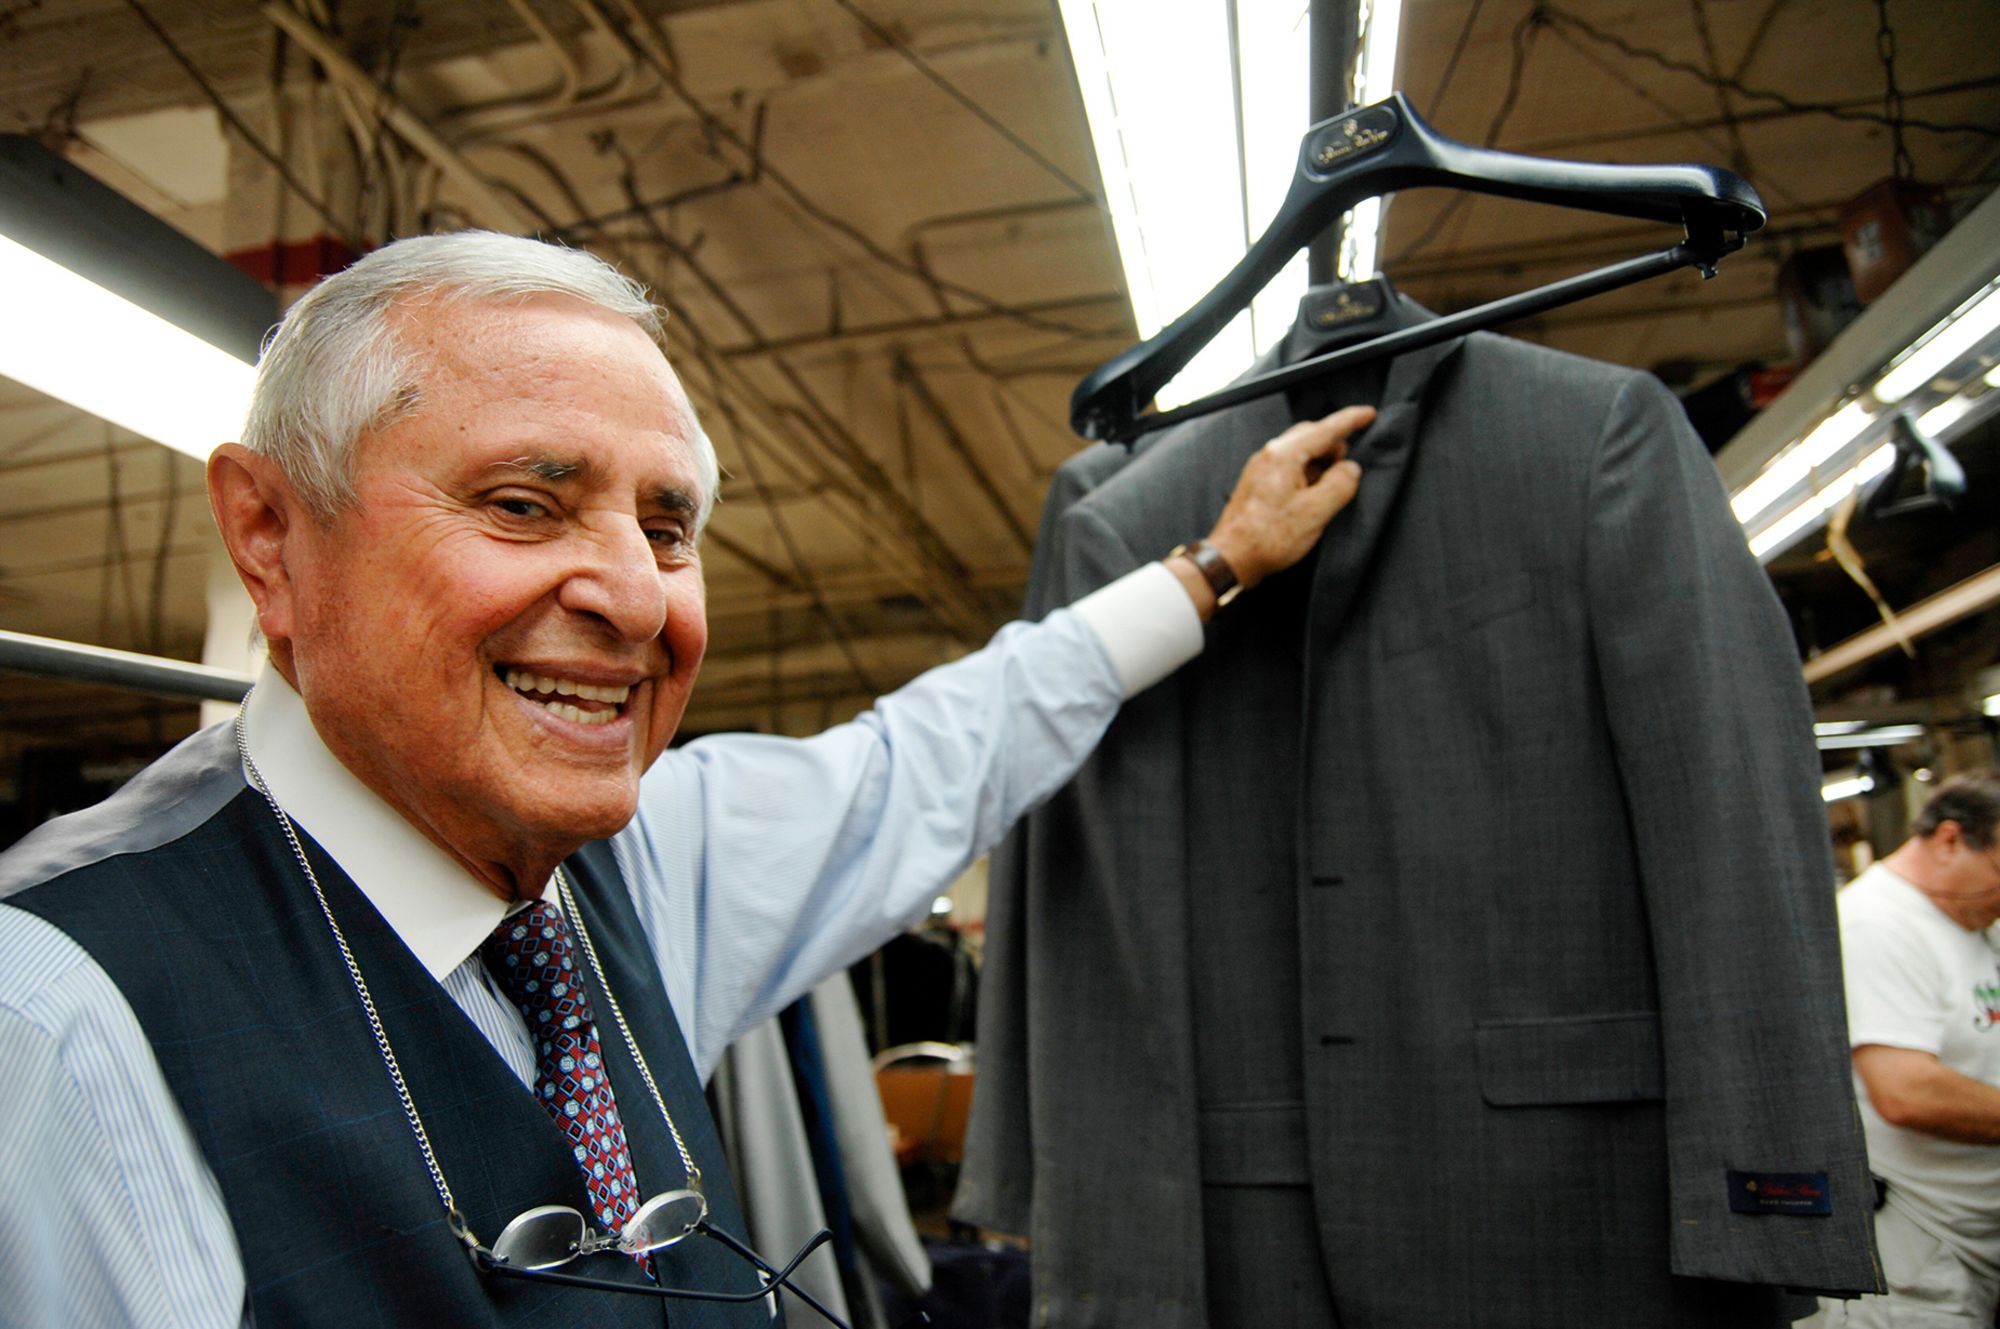 Martin Greenfield, whose custom-made suits were worn by US presidents and A-list celebrities, died on March 20 at 95, his sons shared on Instagram.